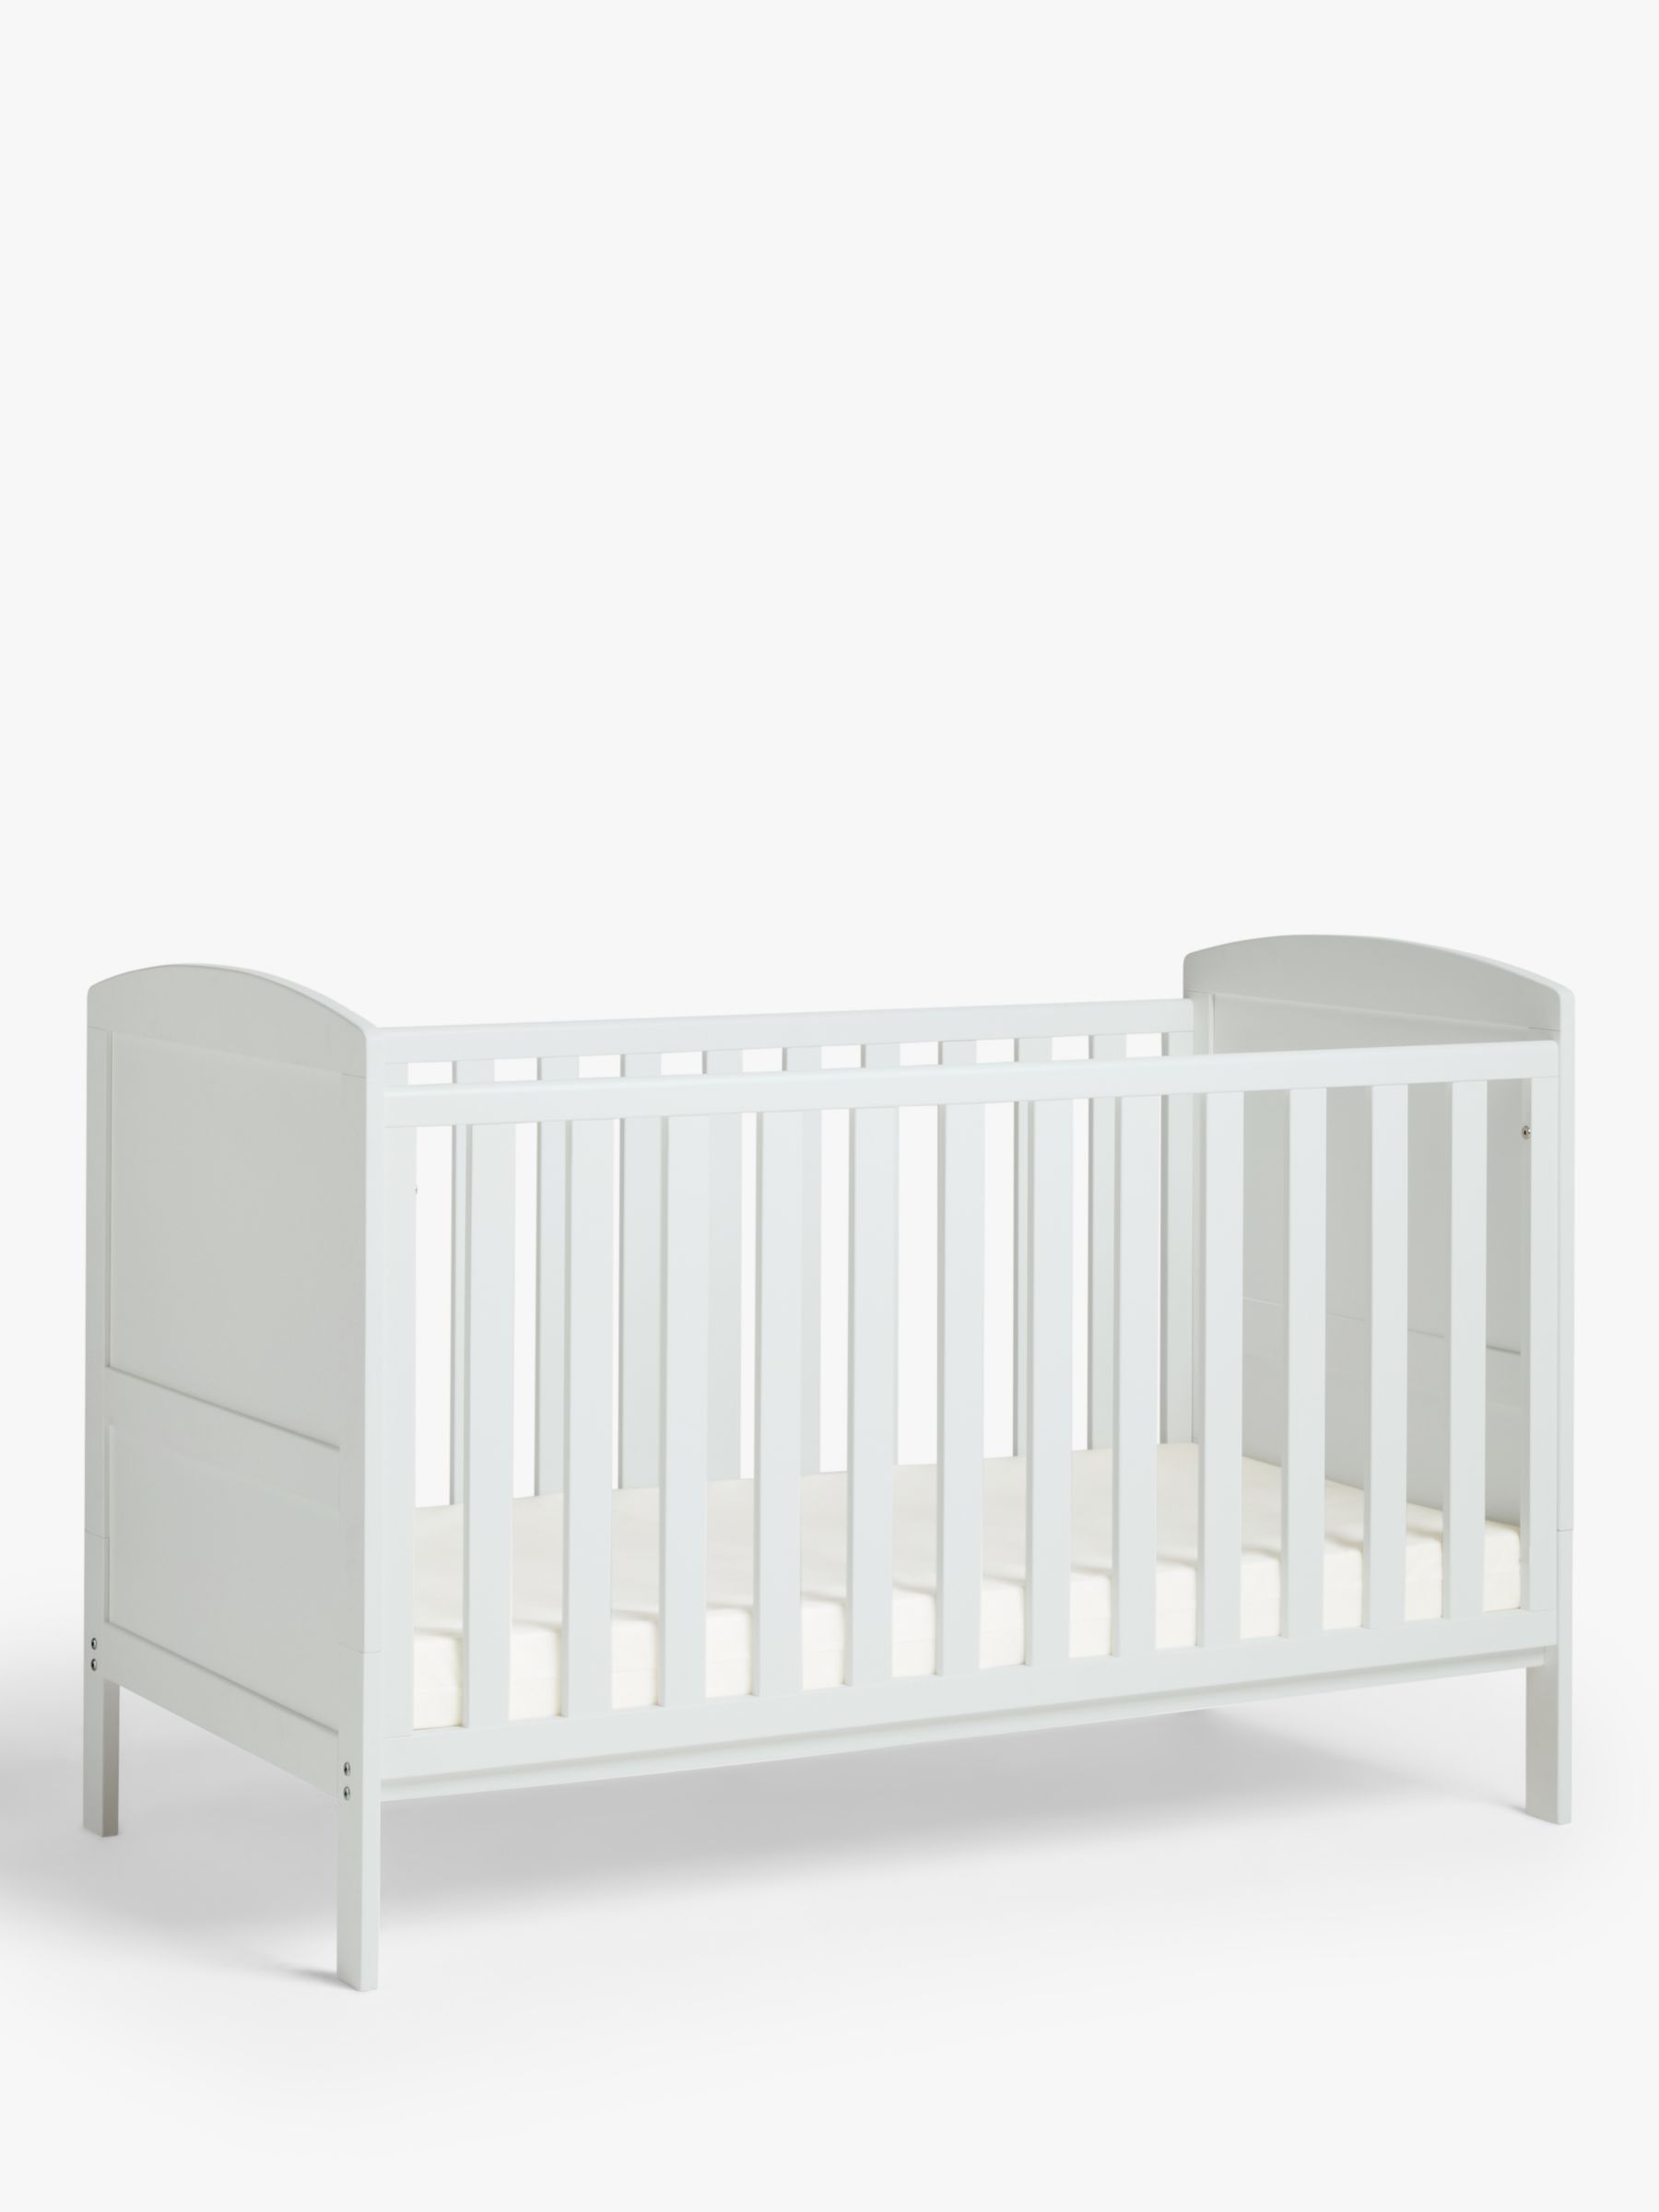 White B4Beds© Cot Bed in White or Pine with Mattress-Converts into Junior/Toddler Bed 